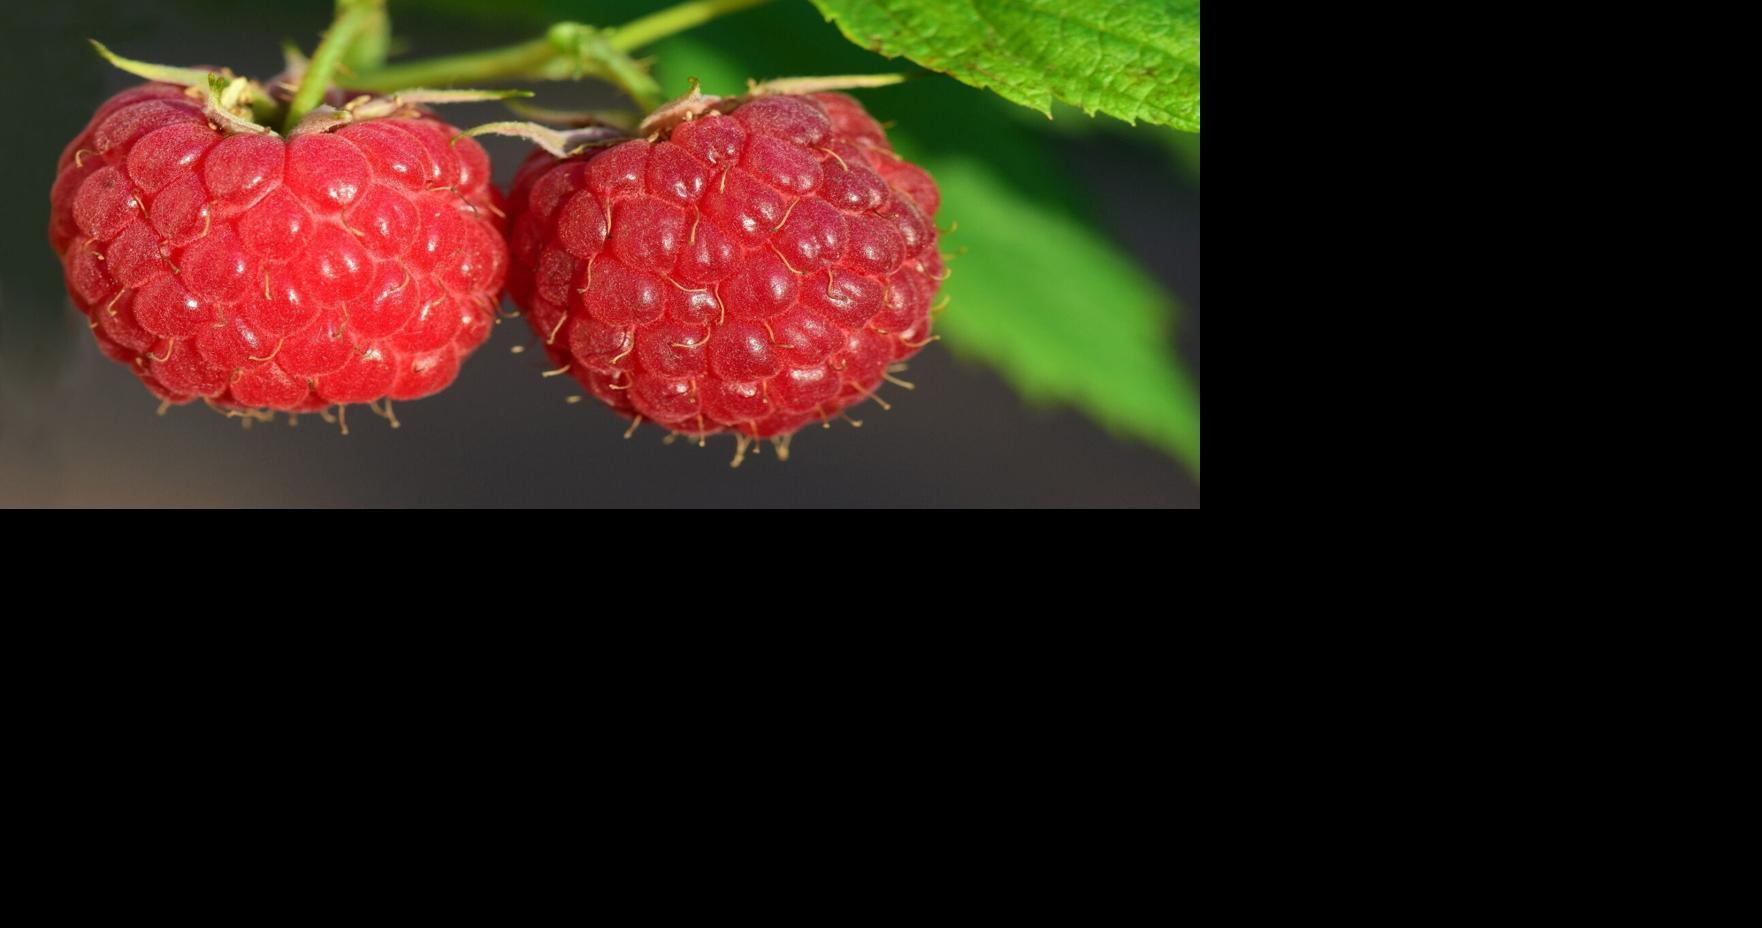 Sarah Browning: Get your raspberries off to a good start | Home & Garden